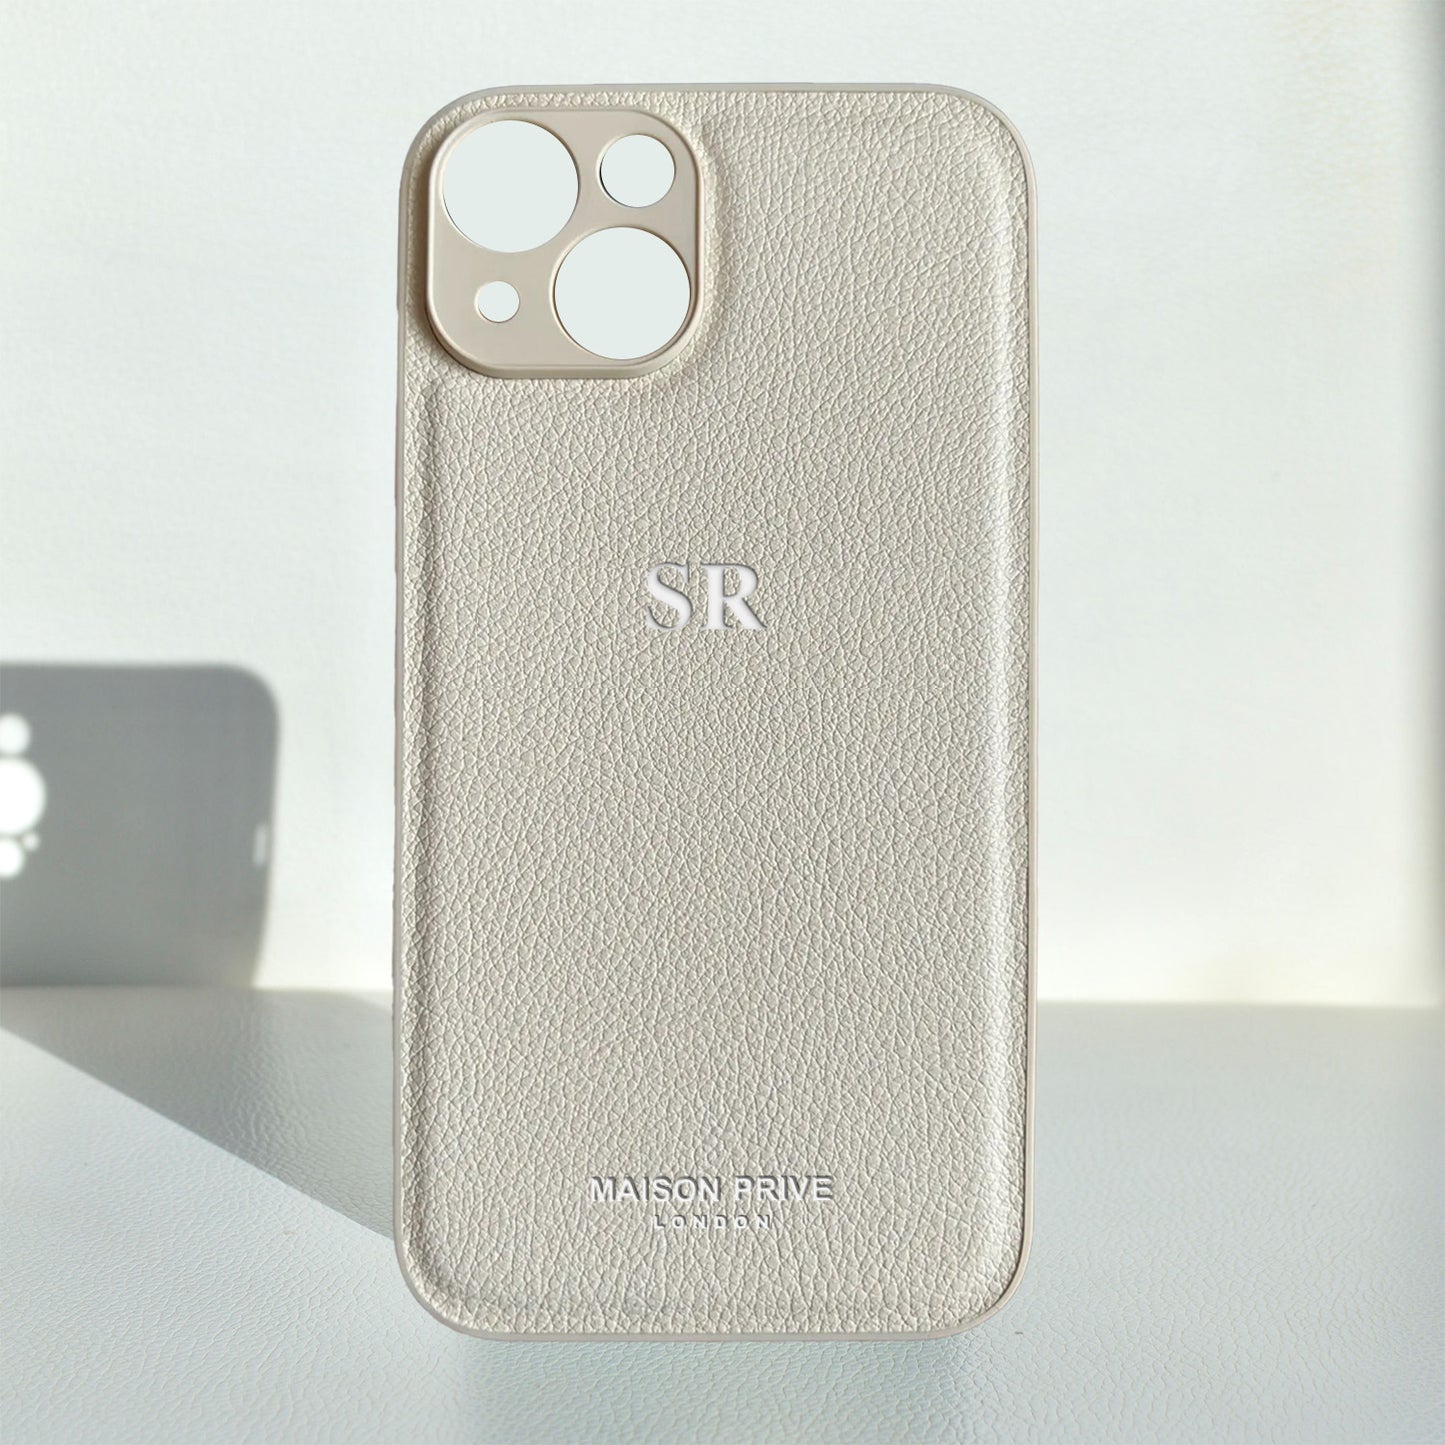 PHONE CASE IN IVORY SAFFIANO LEATHER